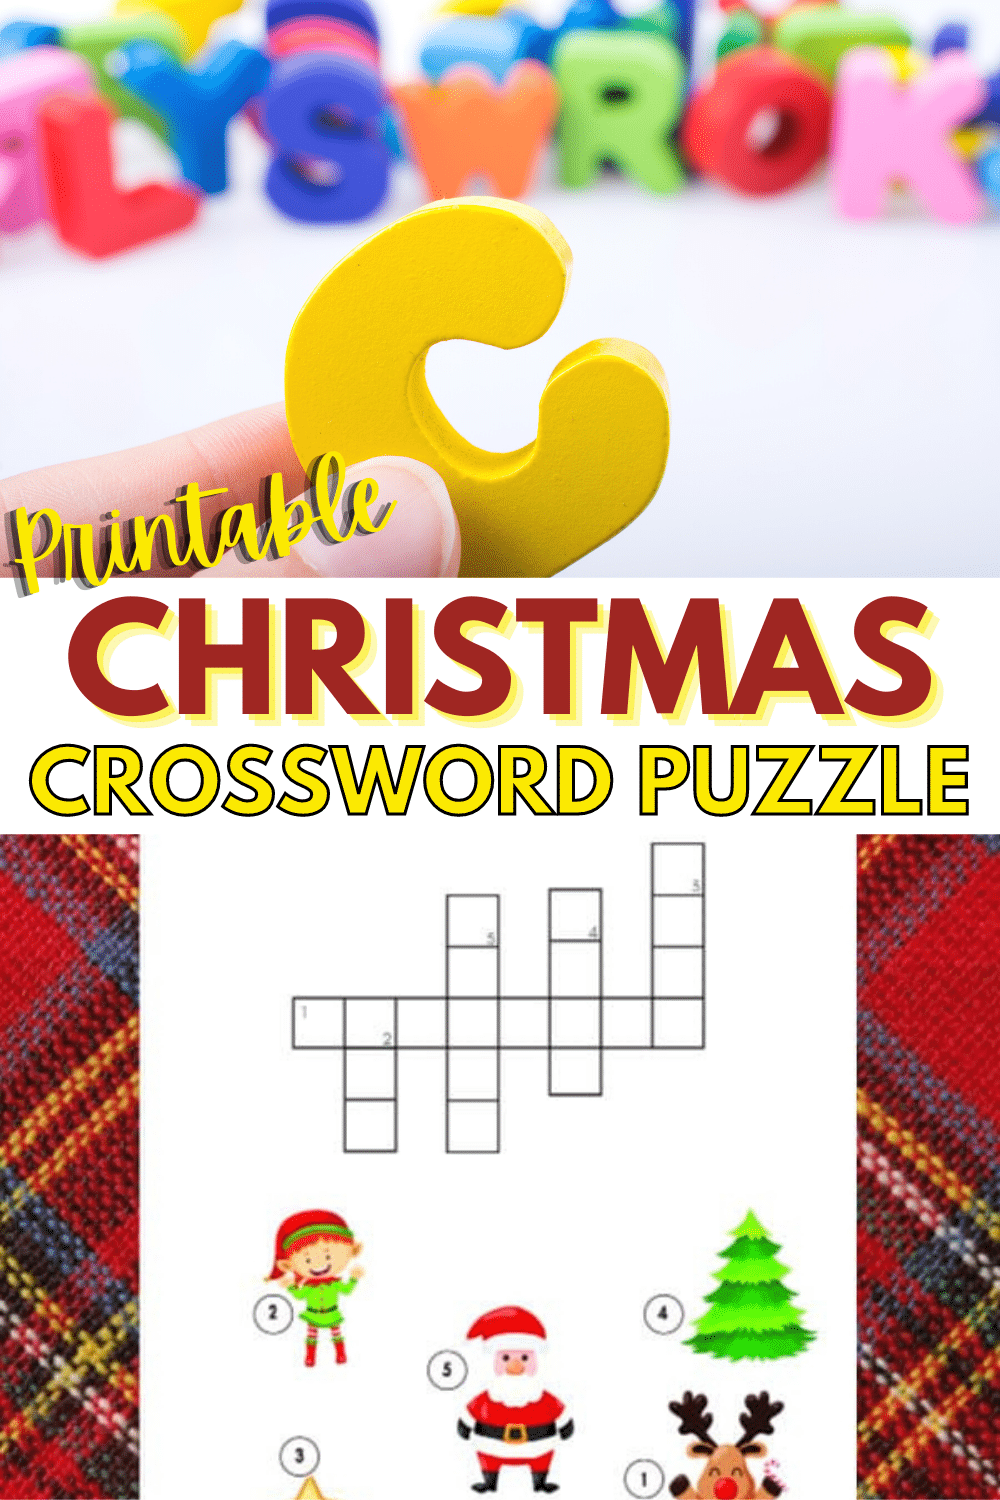 top image is a hand holding a yellow letter C with other colored letters in the background, bottom image is a Christmas Crossword Puzzle for Kids